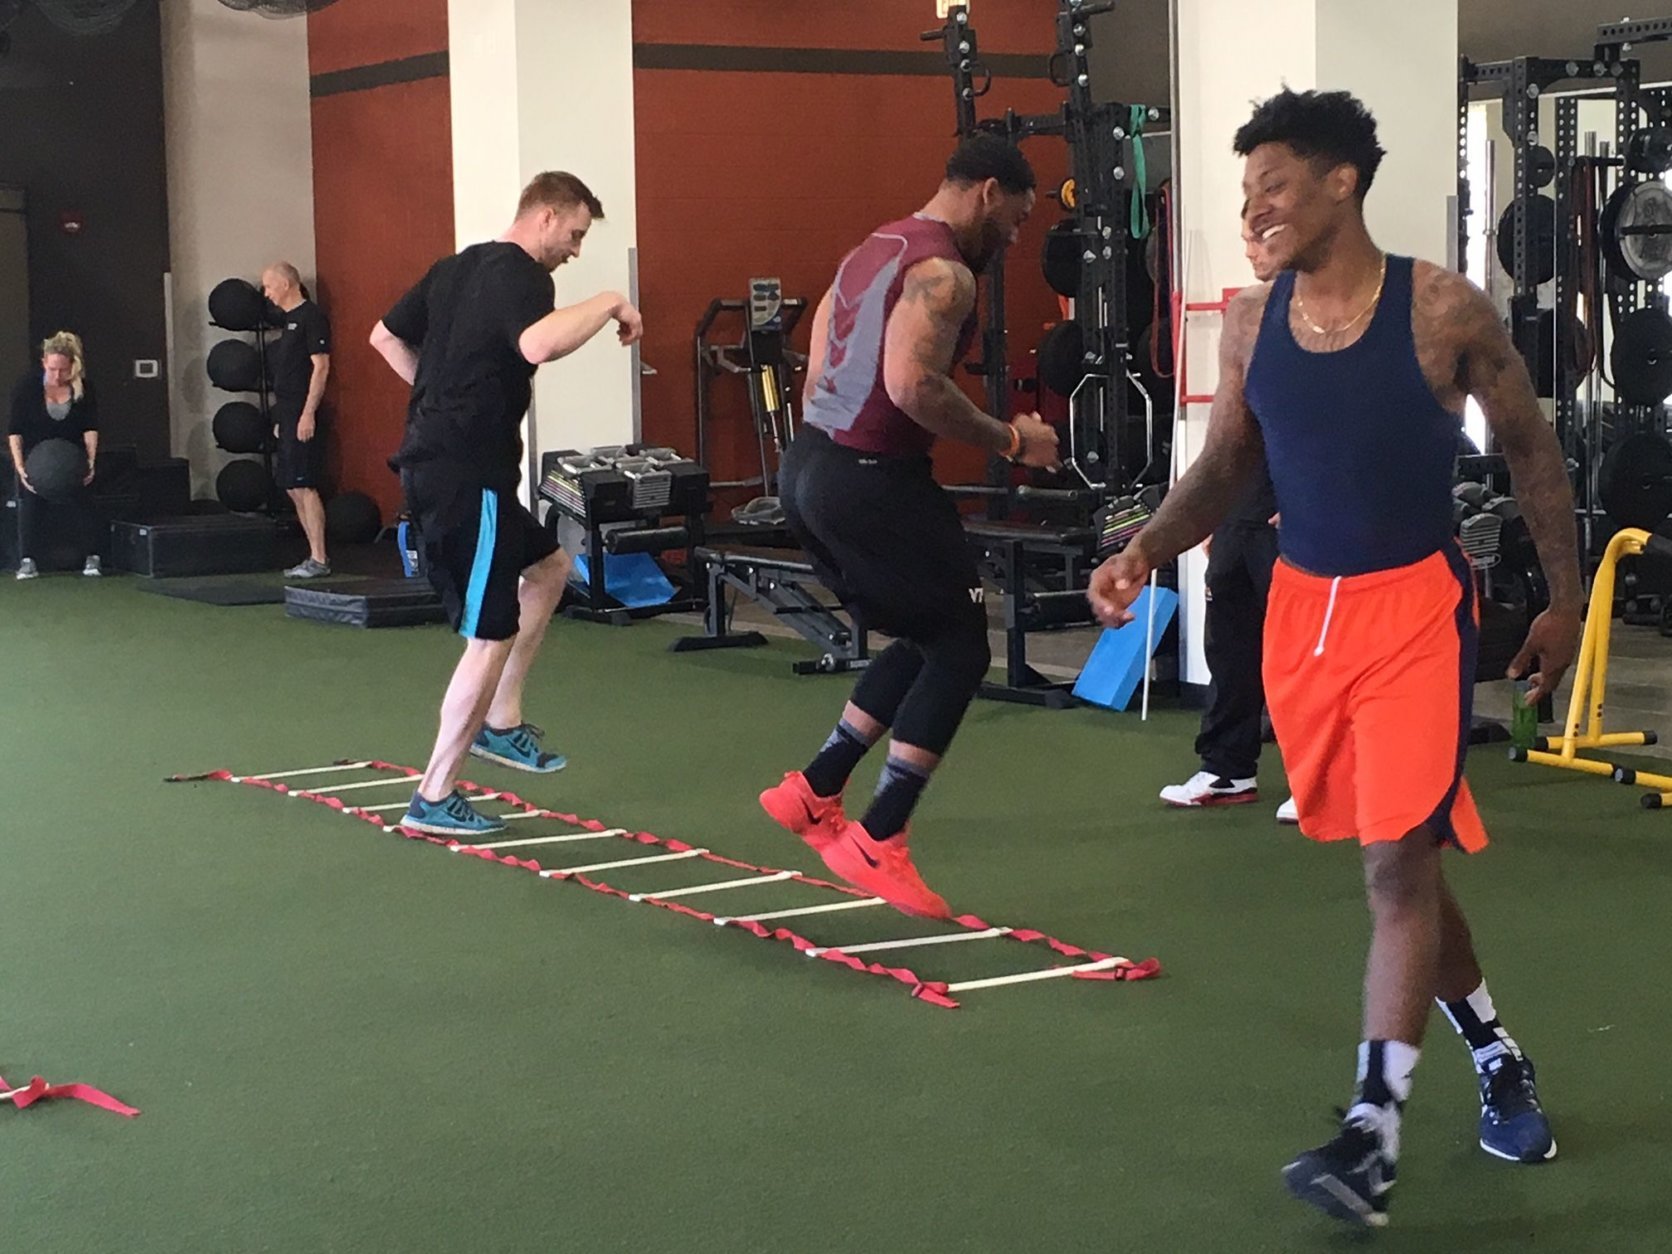 Jessop trains at OneLife Fitness in Brambleton with other athletes including Nigel Johnson (right), who played on the Virginia basketball team as a graduate transfer this season and is looking to improve before the NBA Draft, and Deon Clarke, a former Virginia Tech linebacker who latched onto the Seattle Seahawks practice squad. (WTOP/Noah Frank)